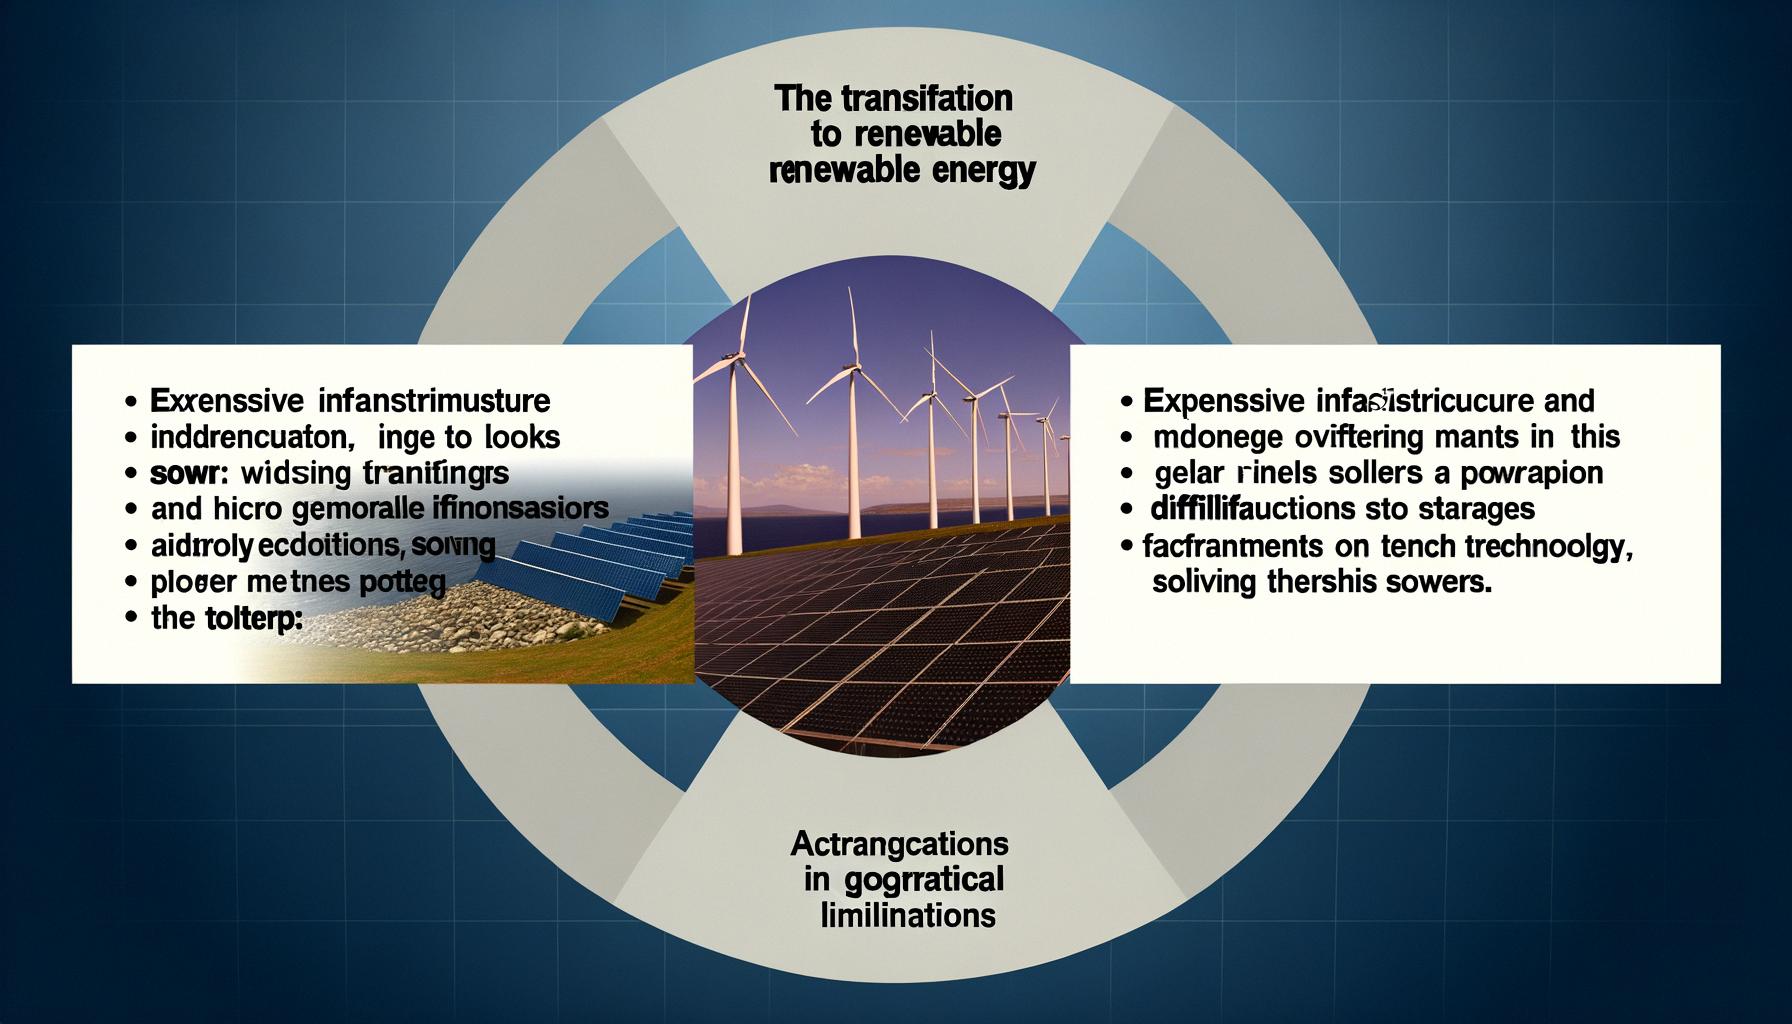 Renewable energy advancement faces technological, policy, and social challenges.